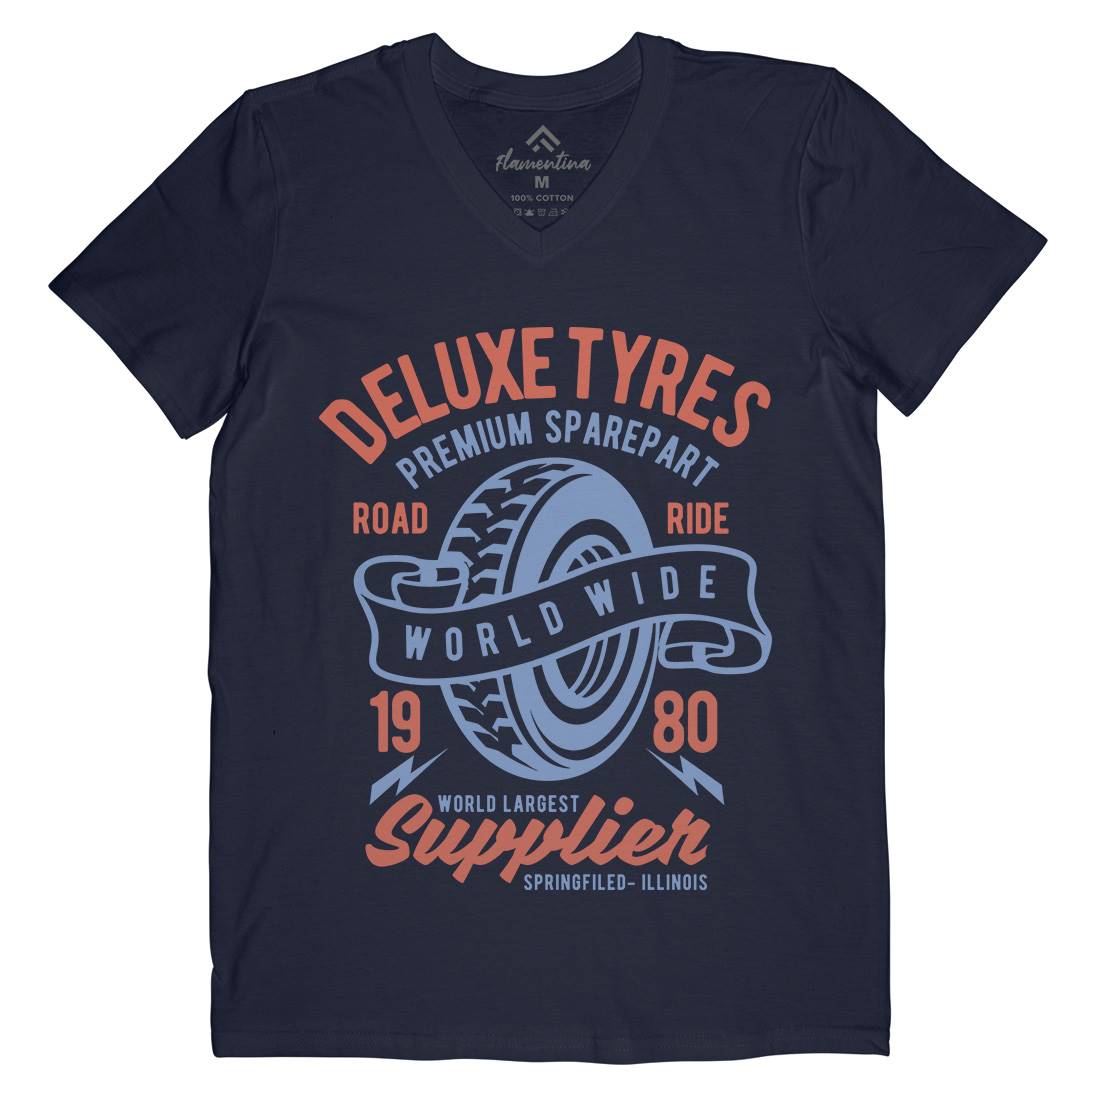 Deluxe Tyres Mens V-Neck T-Shirt Cars B204